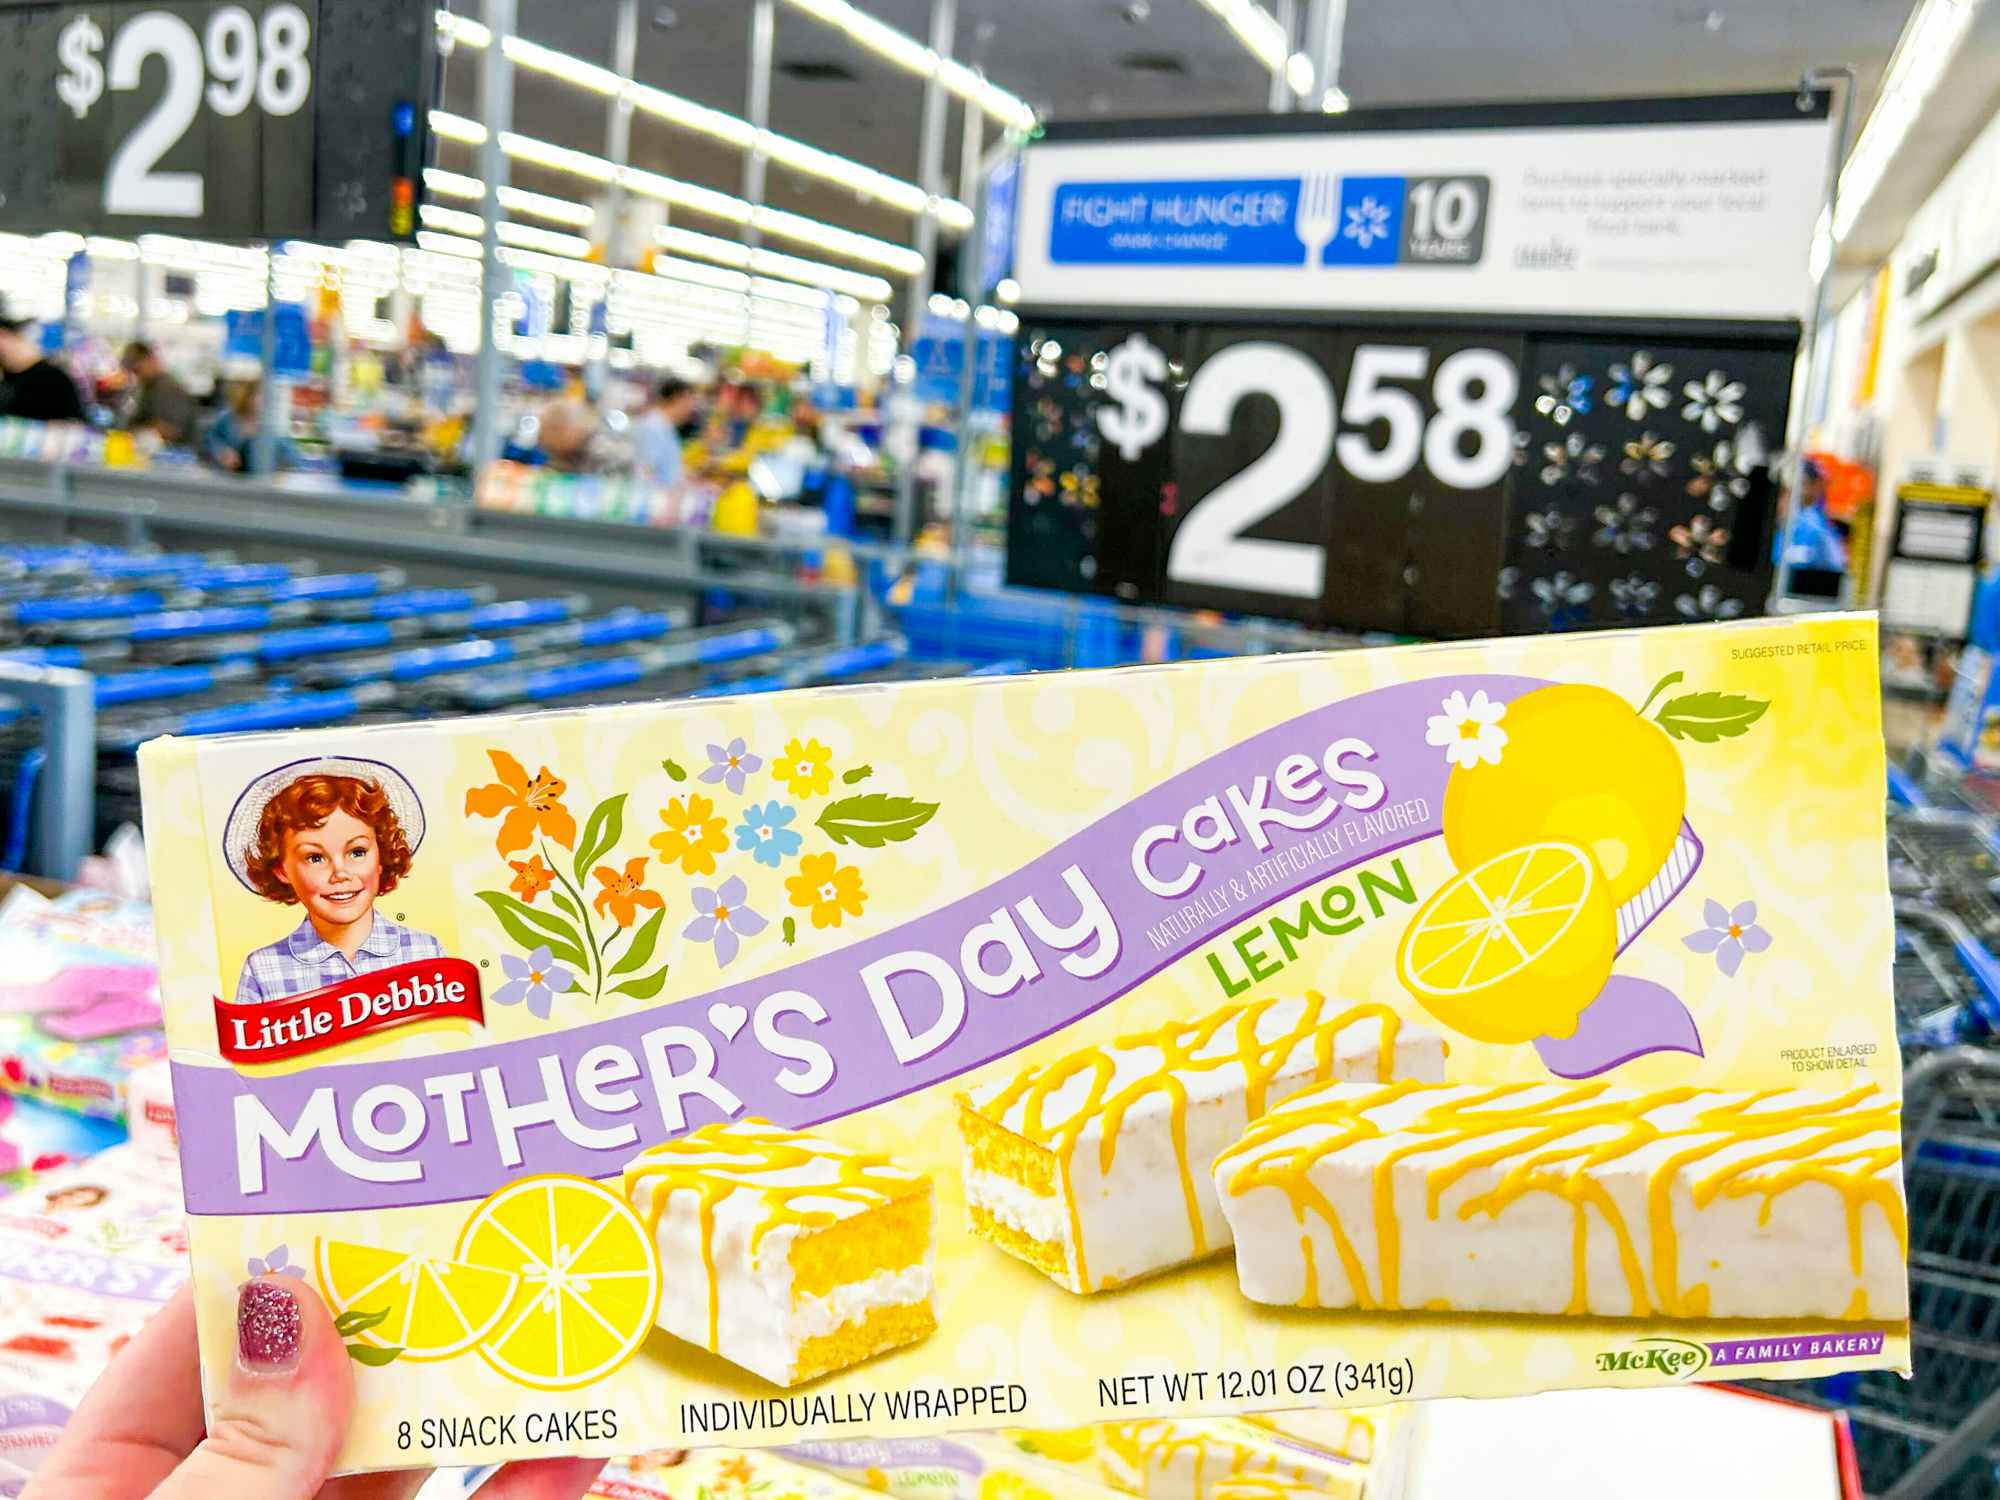 Someone holding a box of lemon Little Debbie Mother's Day Cakes in Walmart